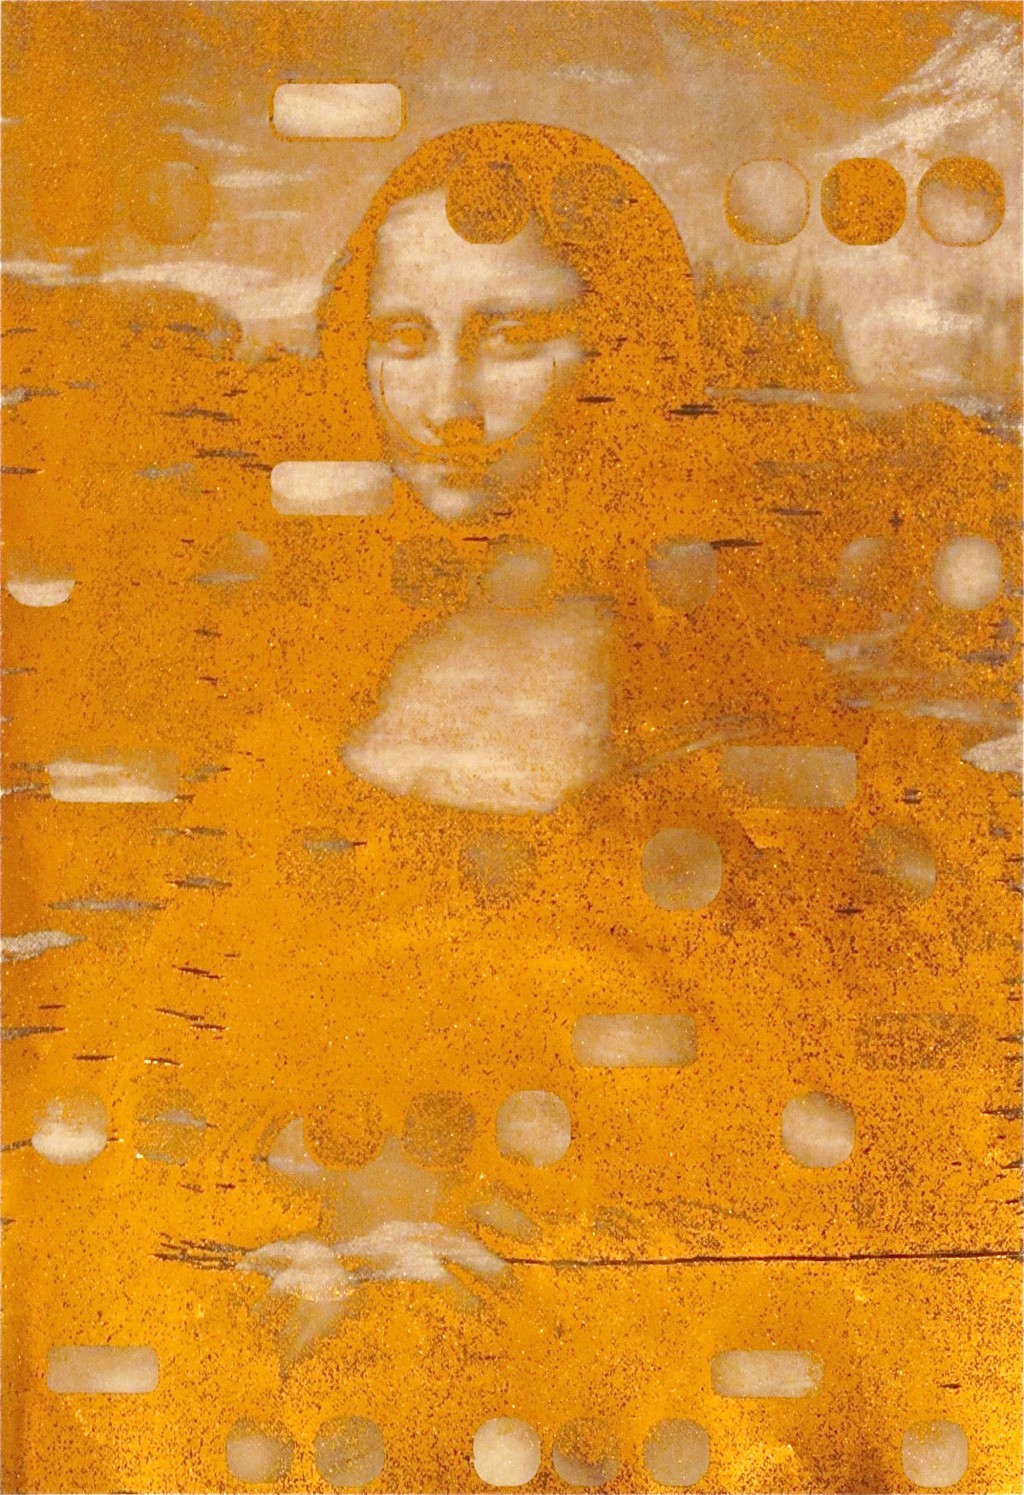 It's All Derivative: Mona as Dali, Gold Negative, 2012 is available on Artspace